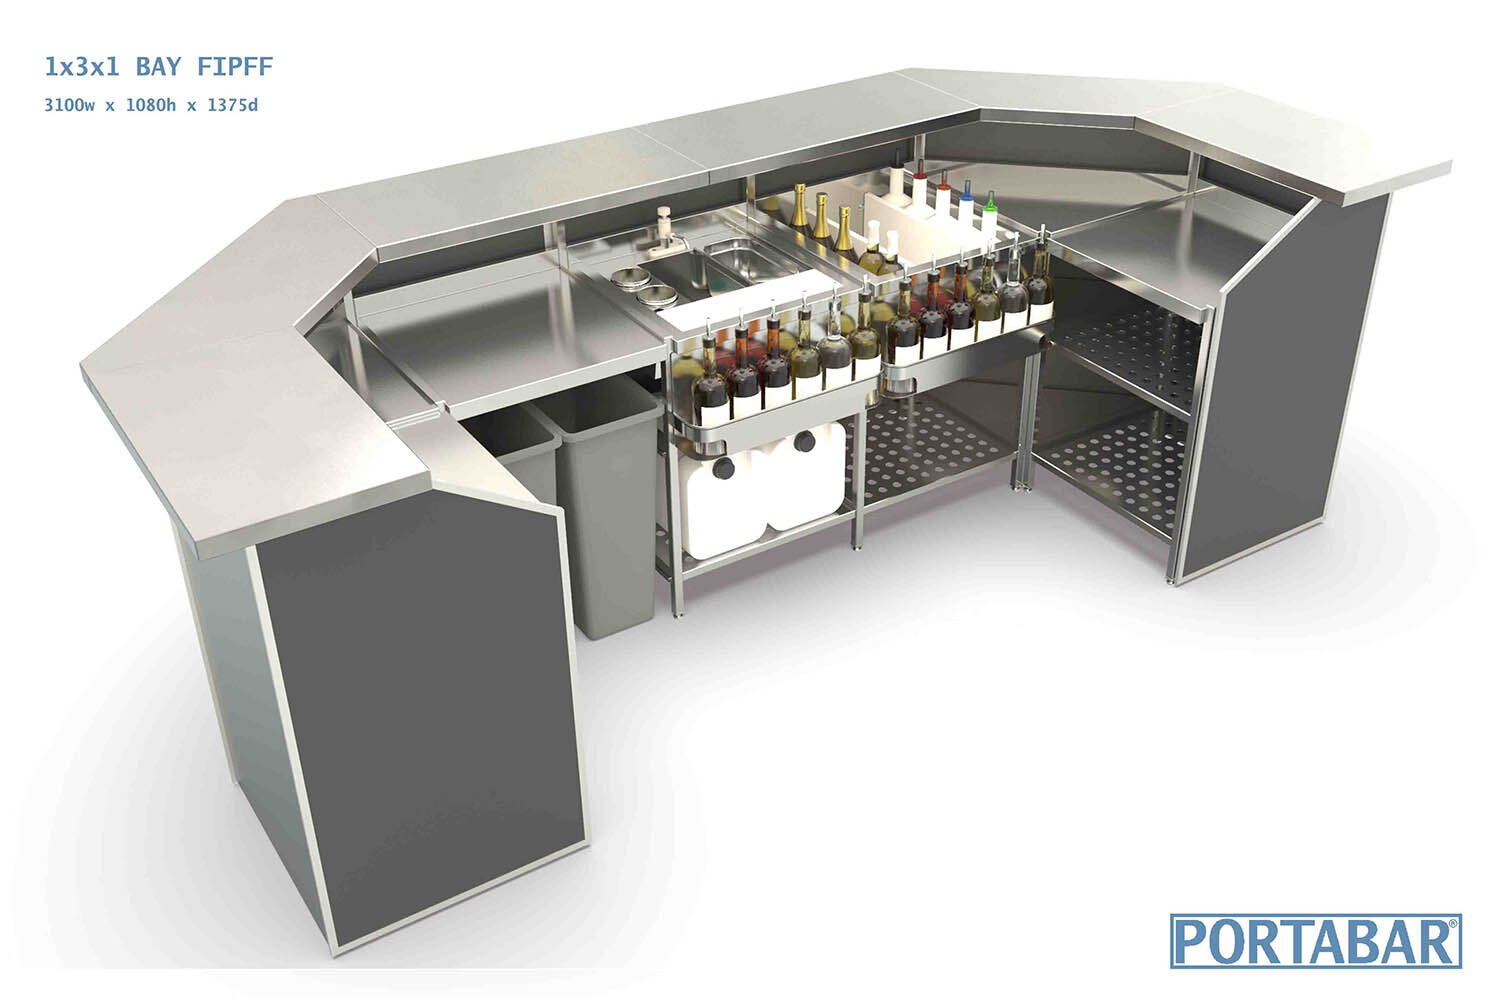 Best Portable Mobile Bars by Portabar